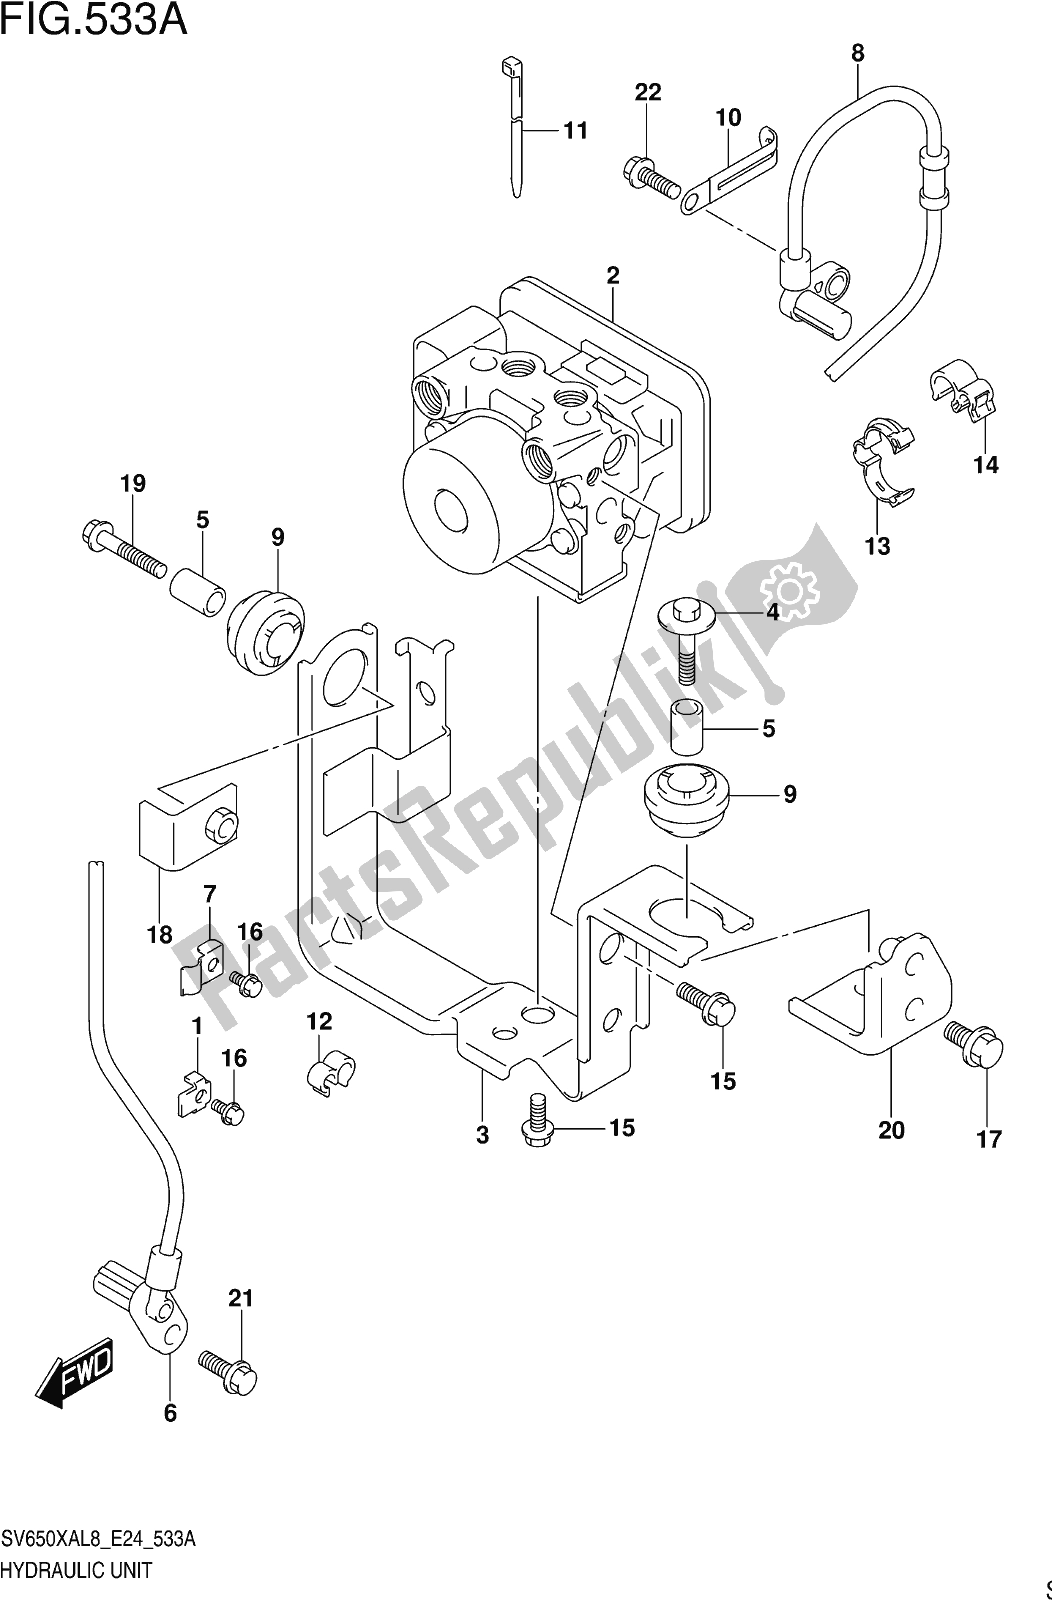 All parts for the Fig. 533a Hydraulic Unit of the Suzuki SV 650 XA 2018